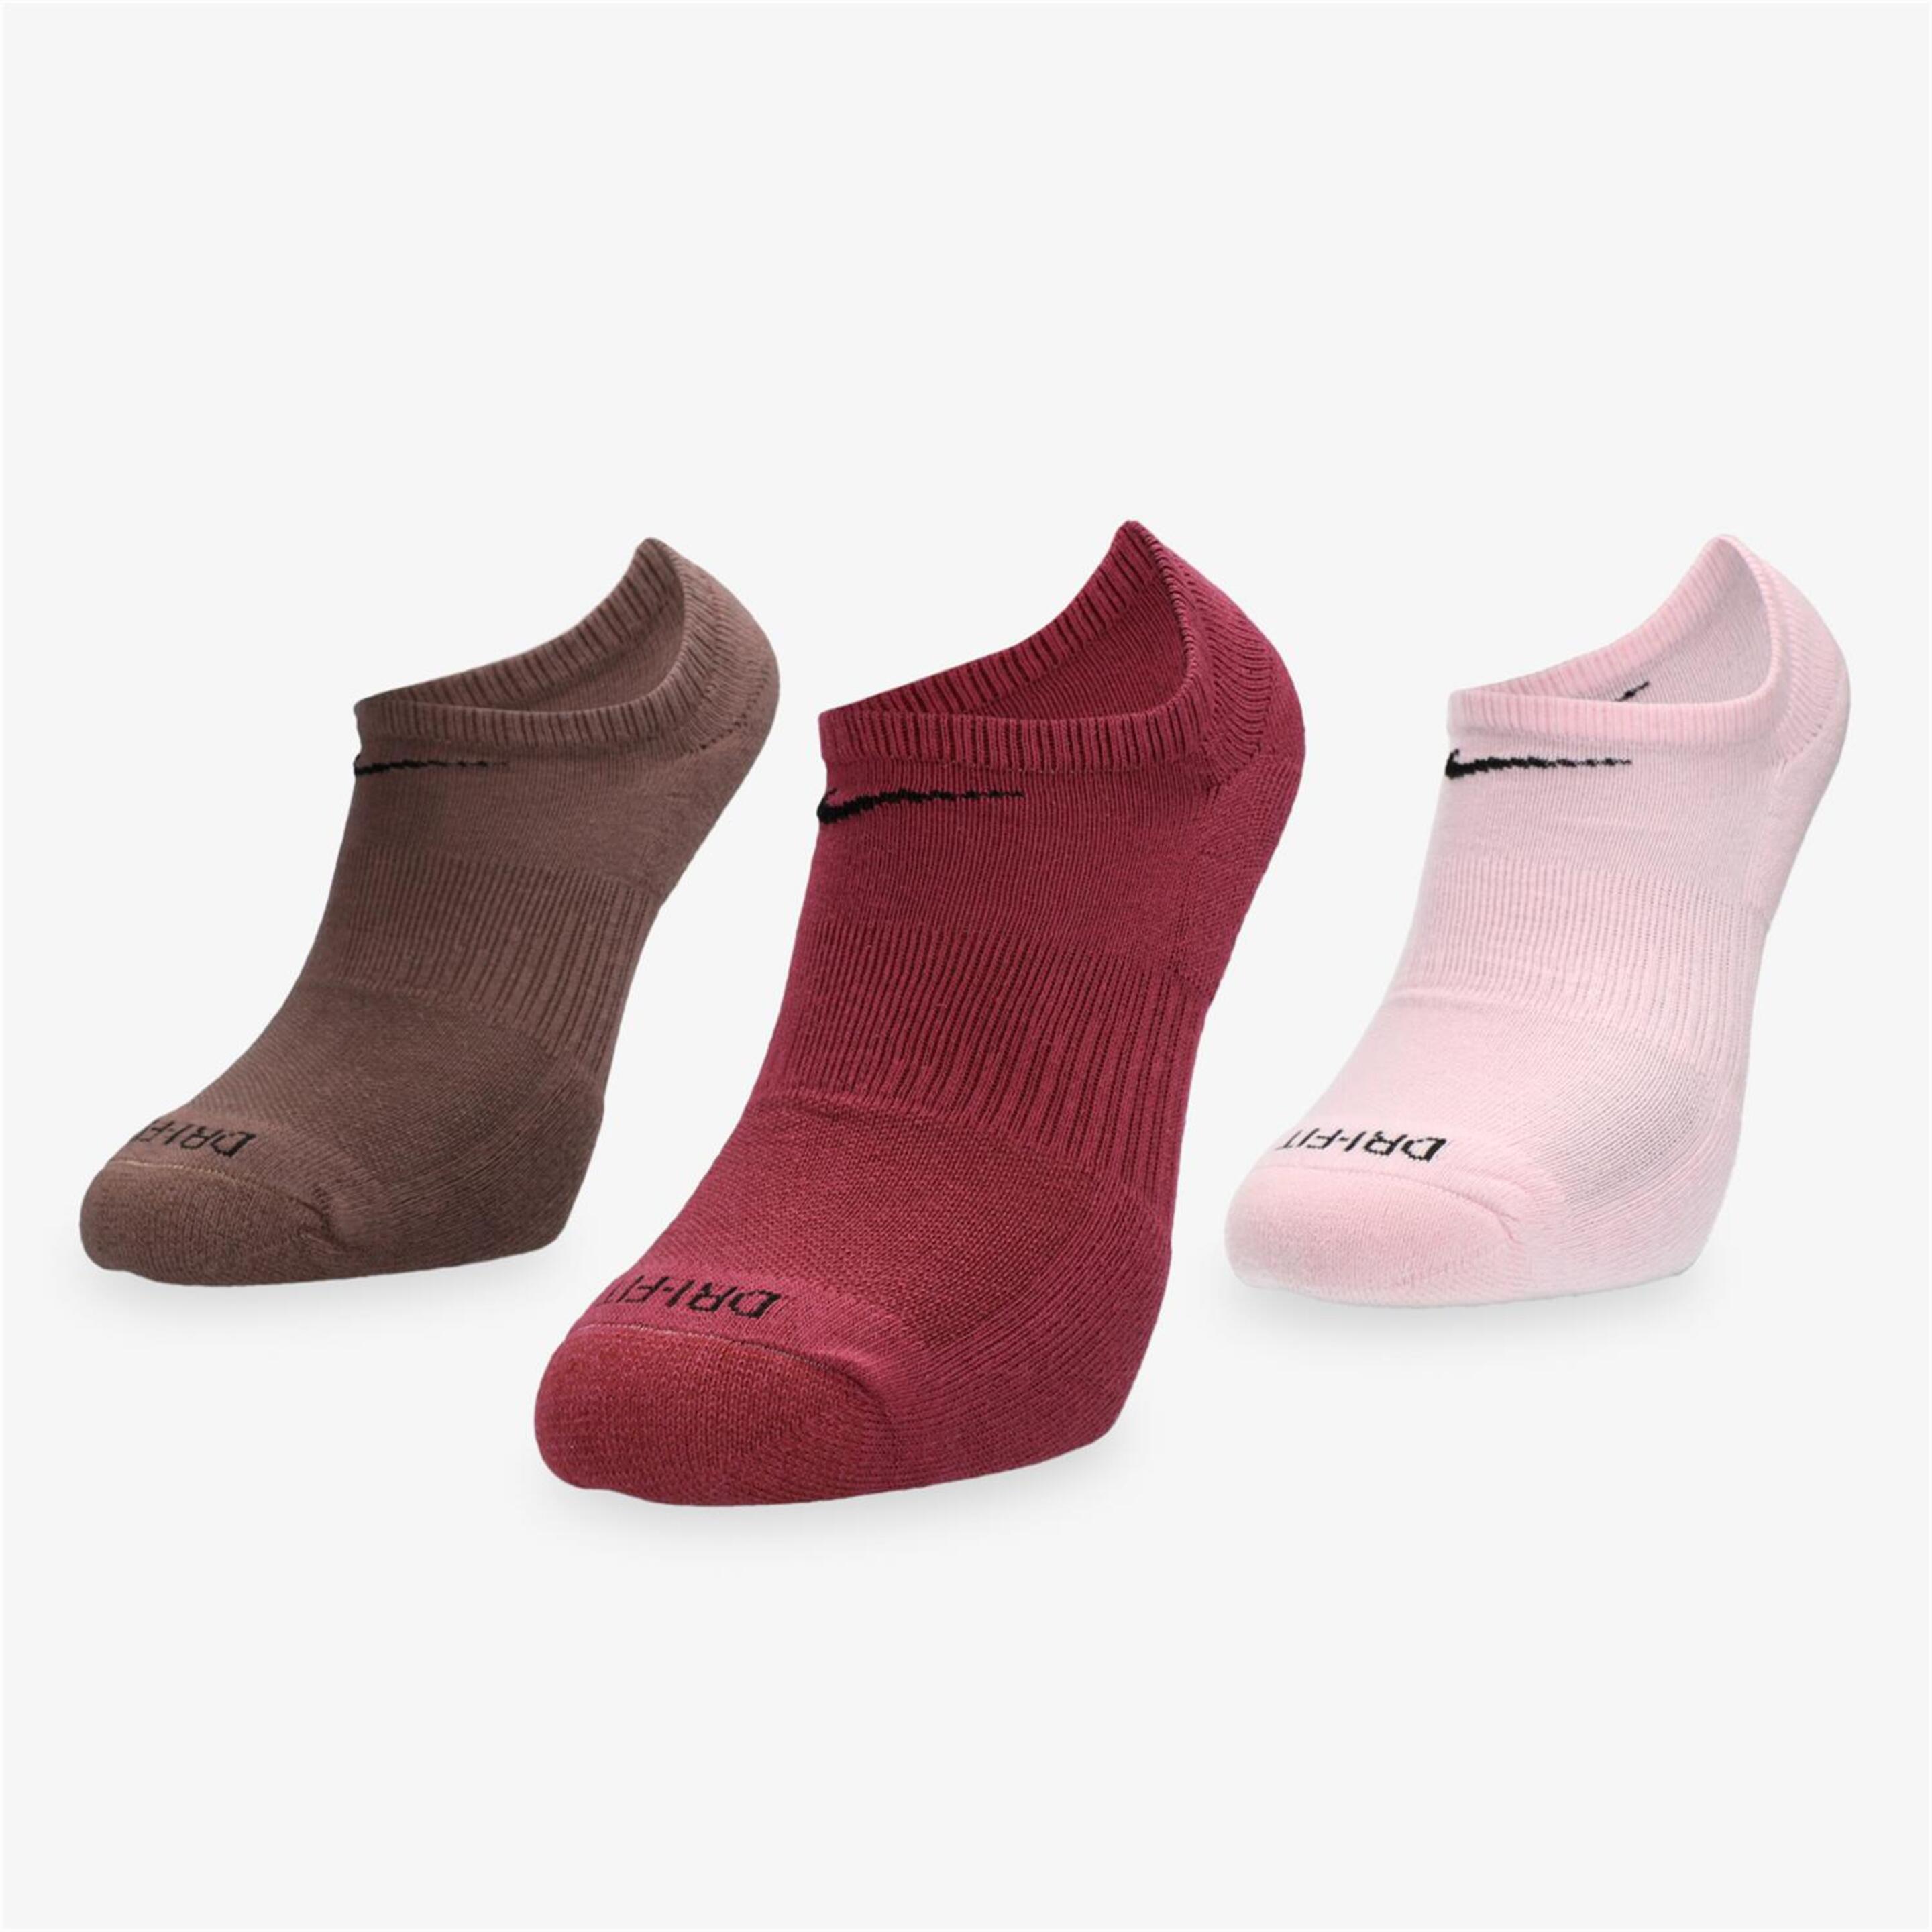 Nike Everyday Plus - Marrón - Calcetines Invisibles